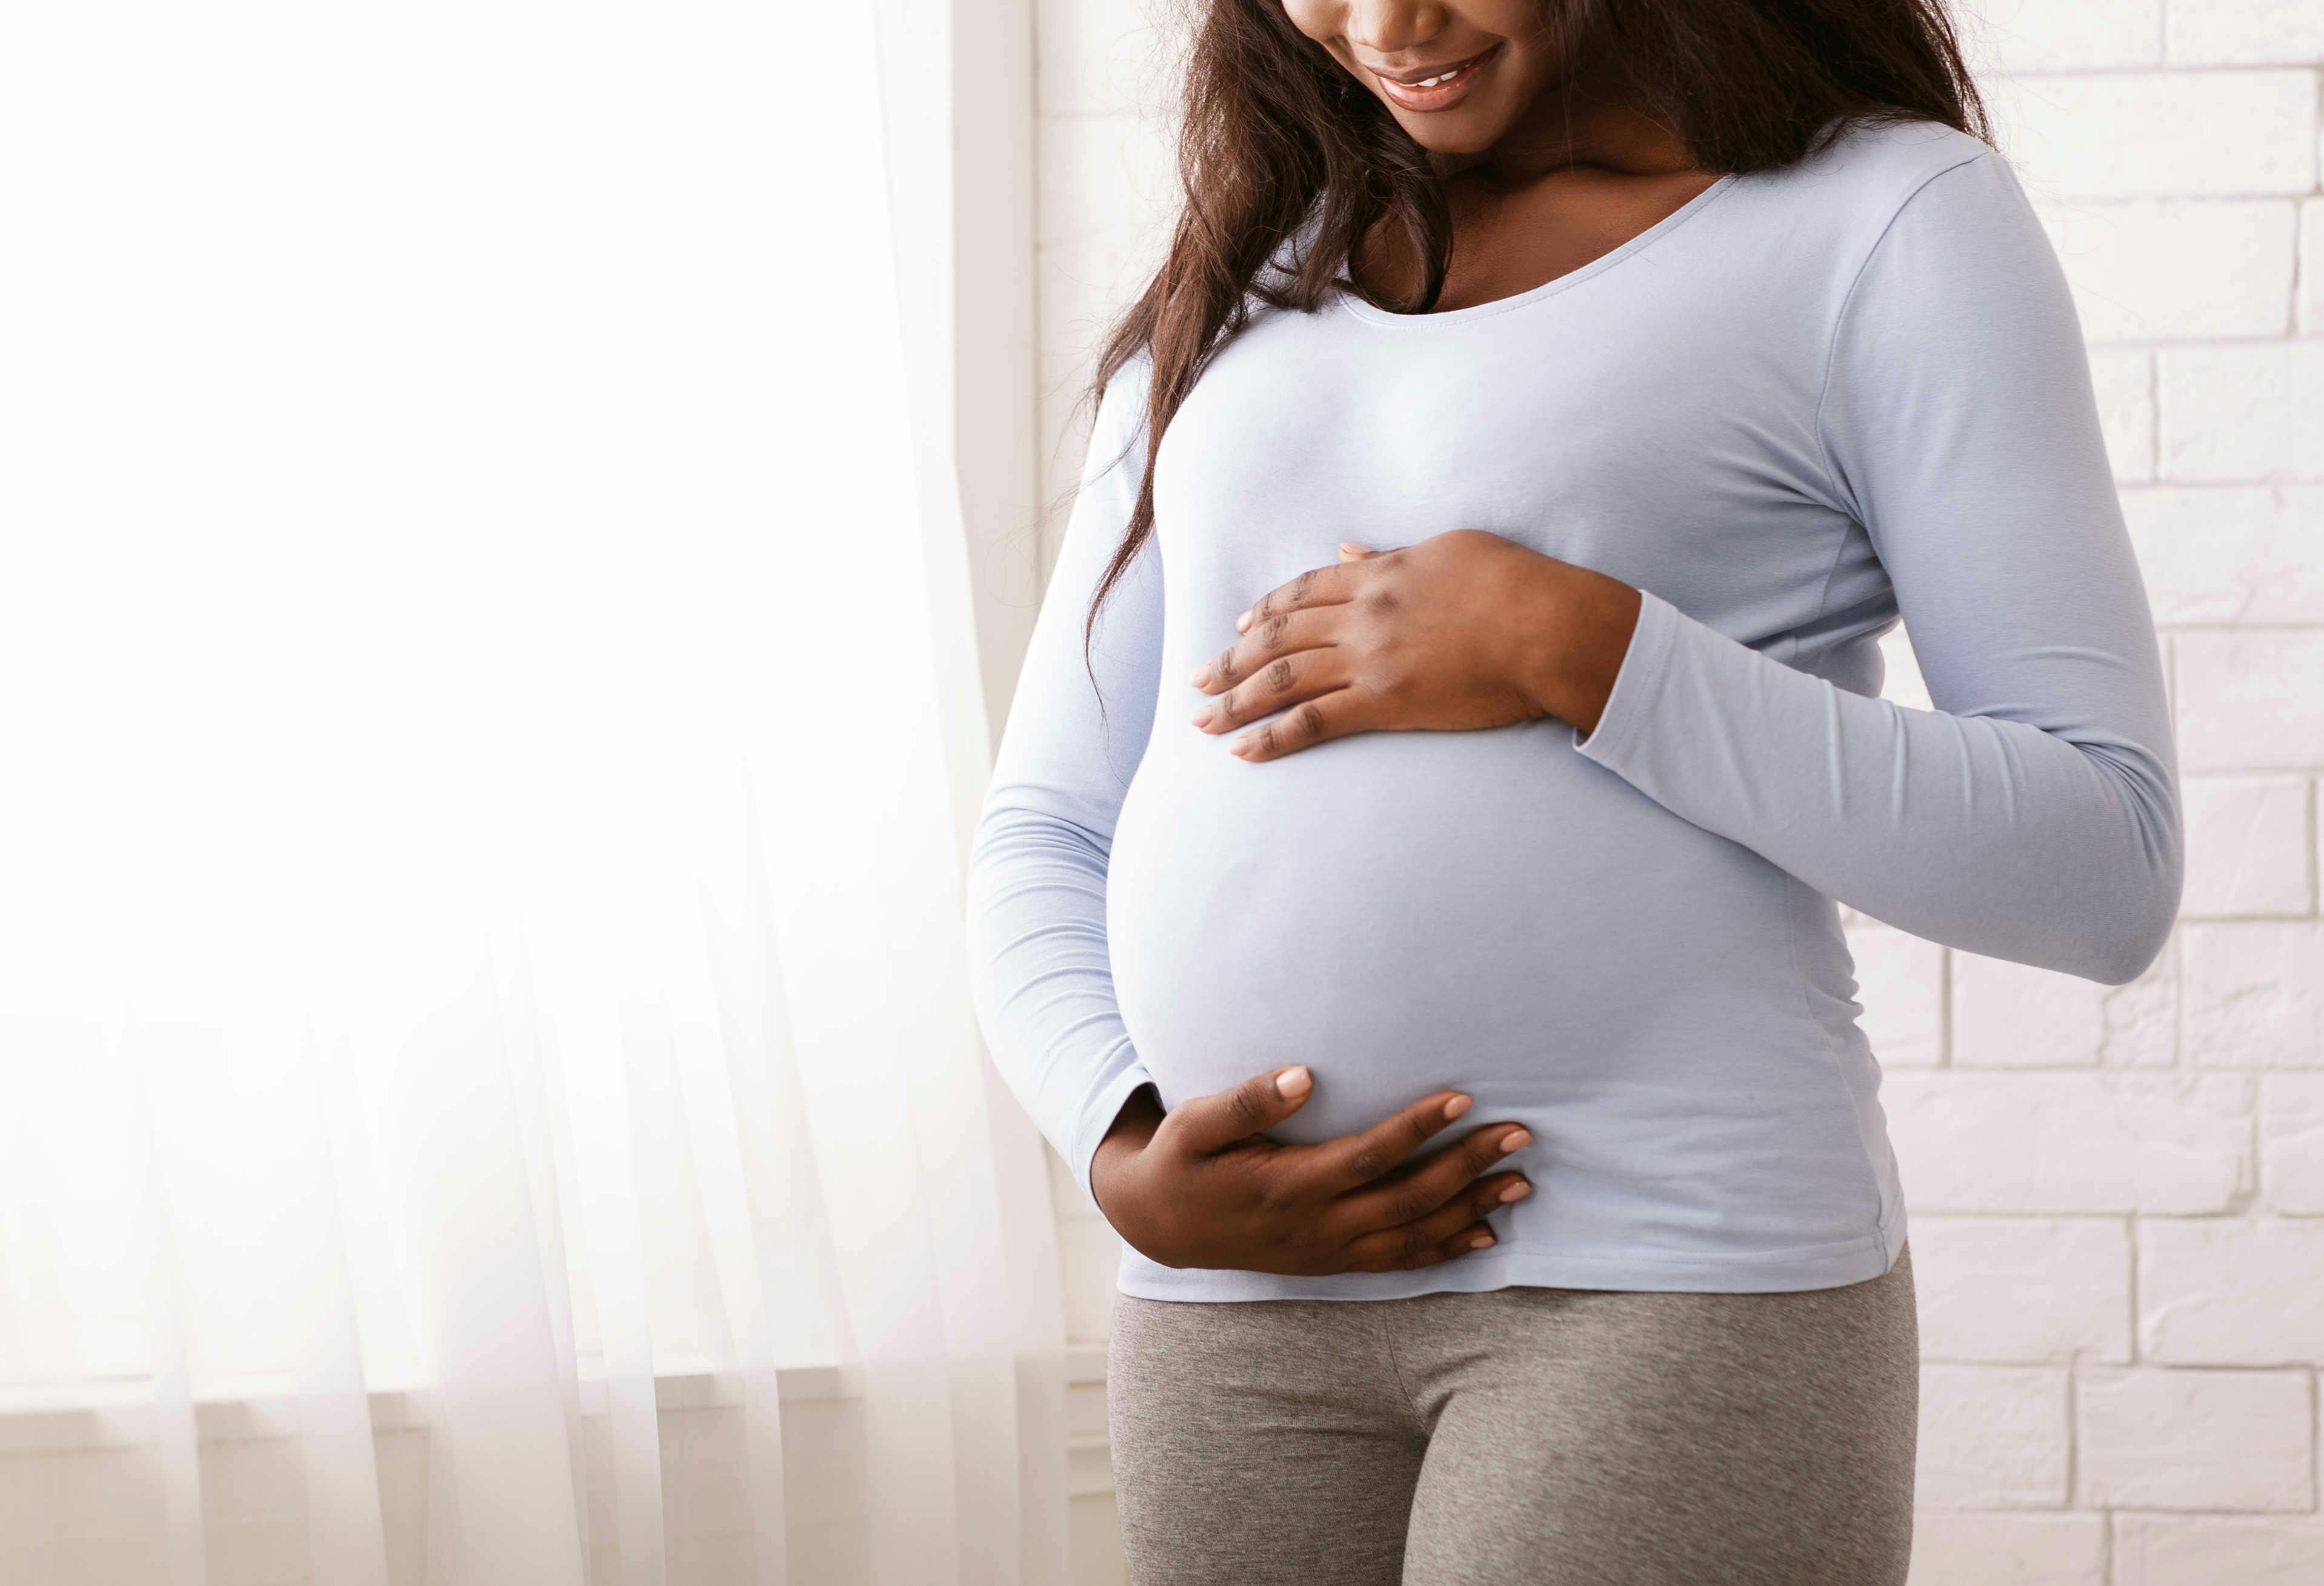 What to expect at 5 months pregnant